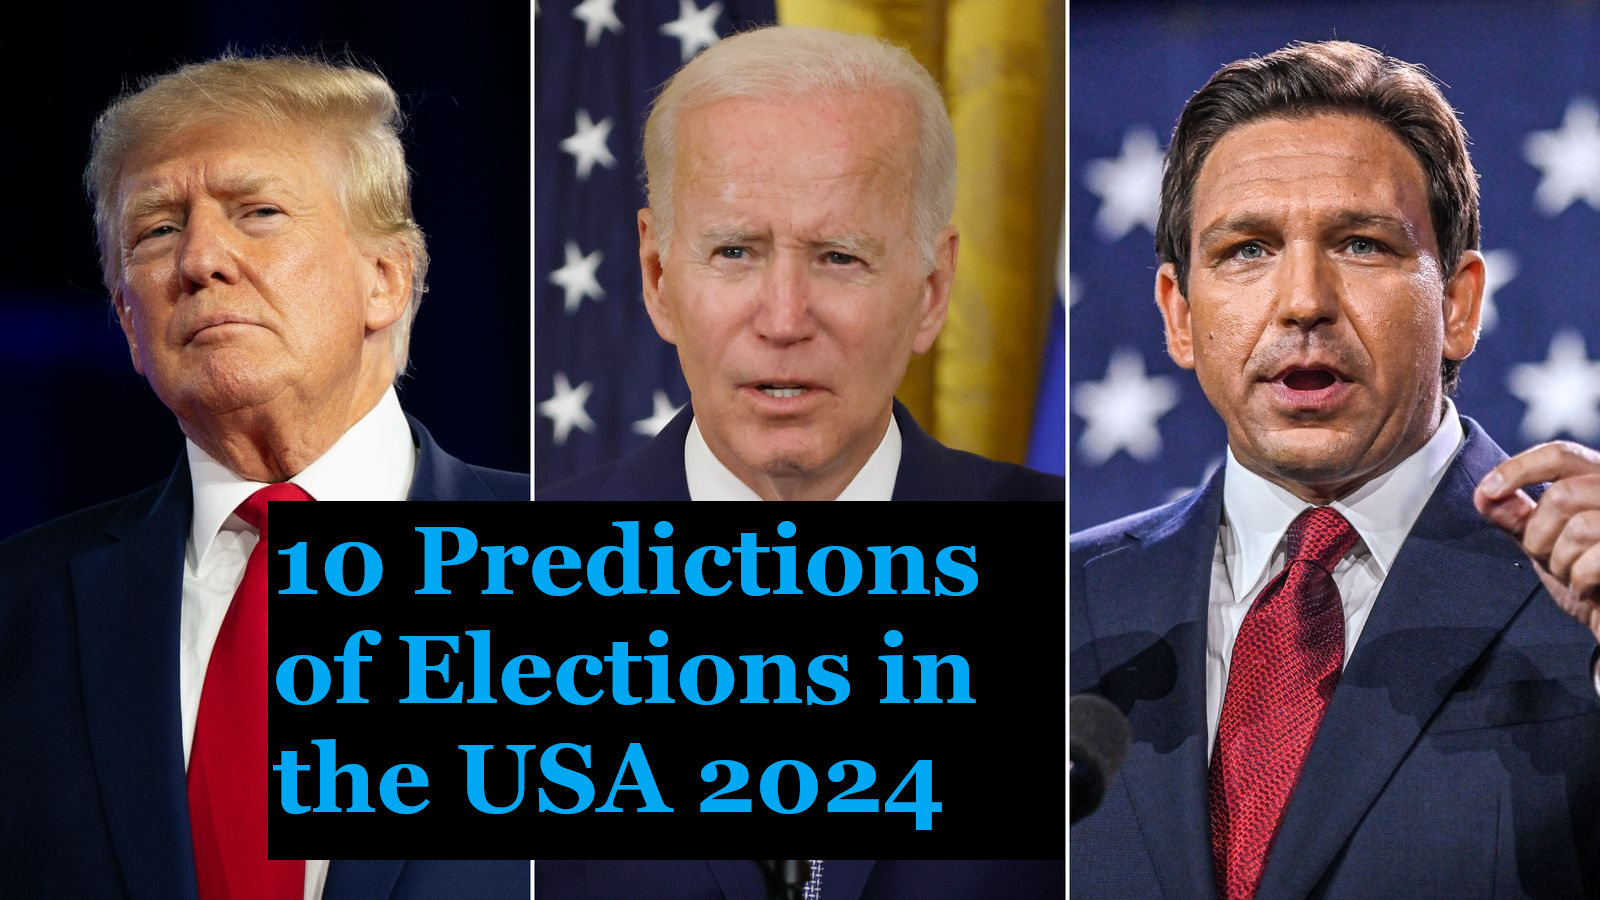 10 Predictions of Elections in the USA 2024